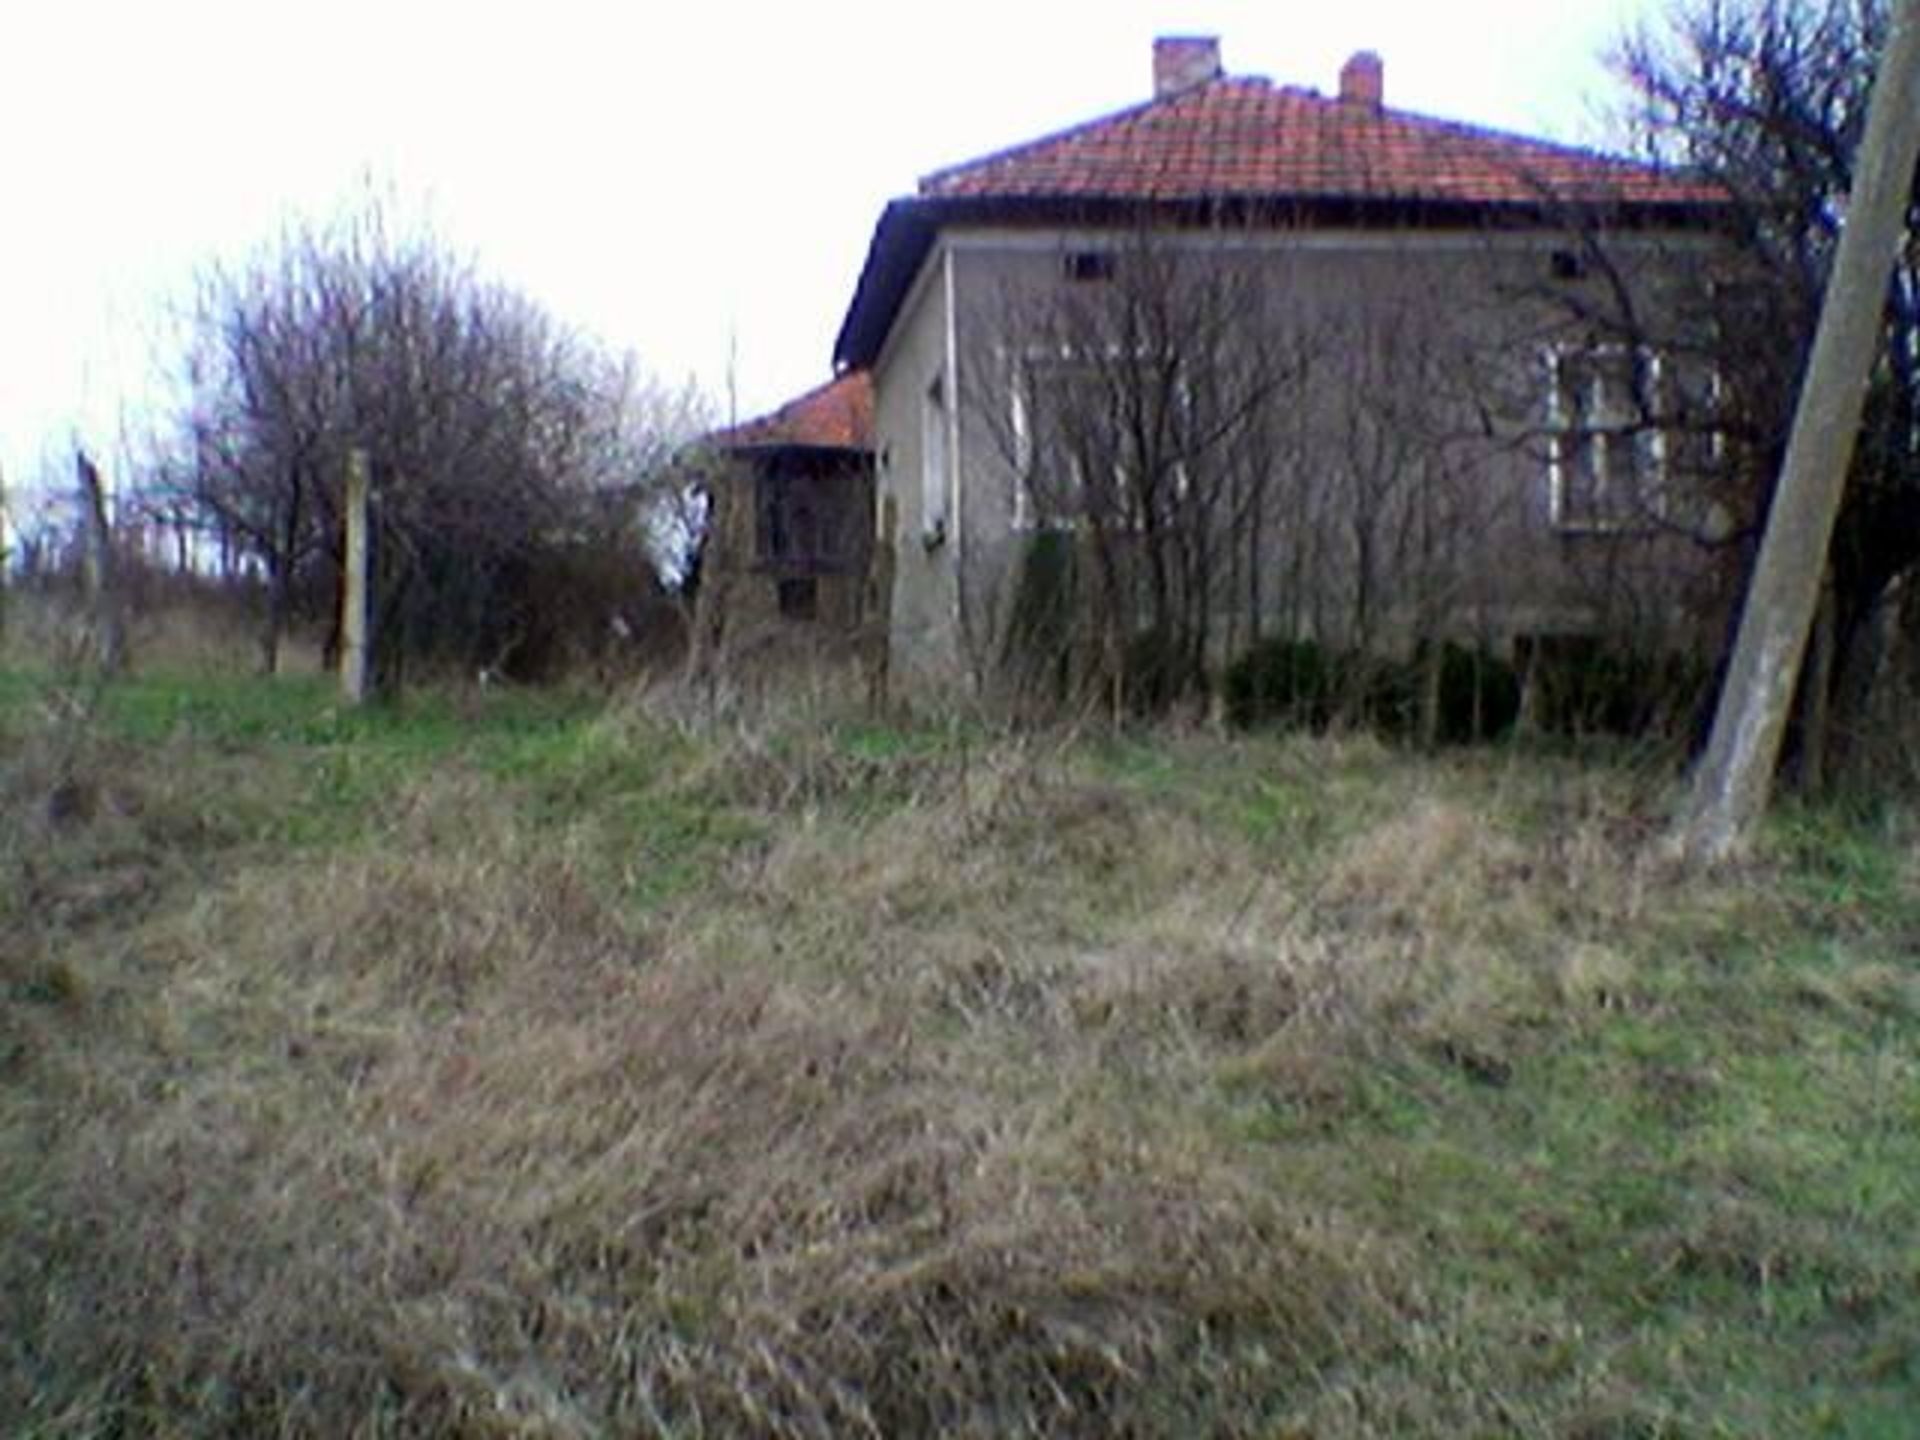 VALCHEK, VIDIN, BULGARIA FREEHOLD HOUSE 1/3 ACRE WITH DEEDS - Image 2 of 9